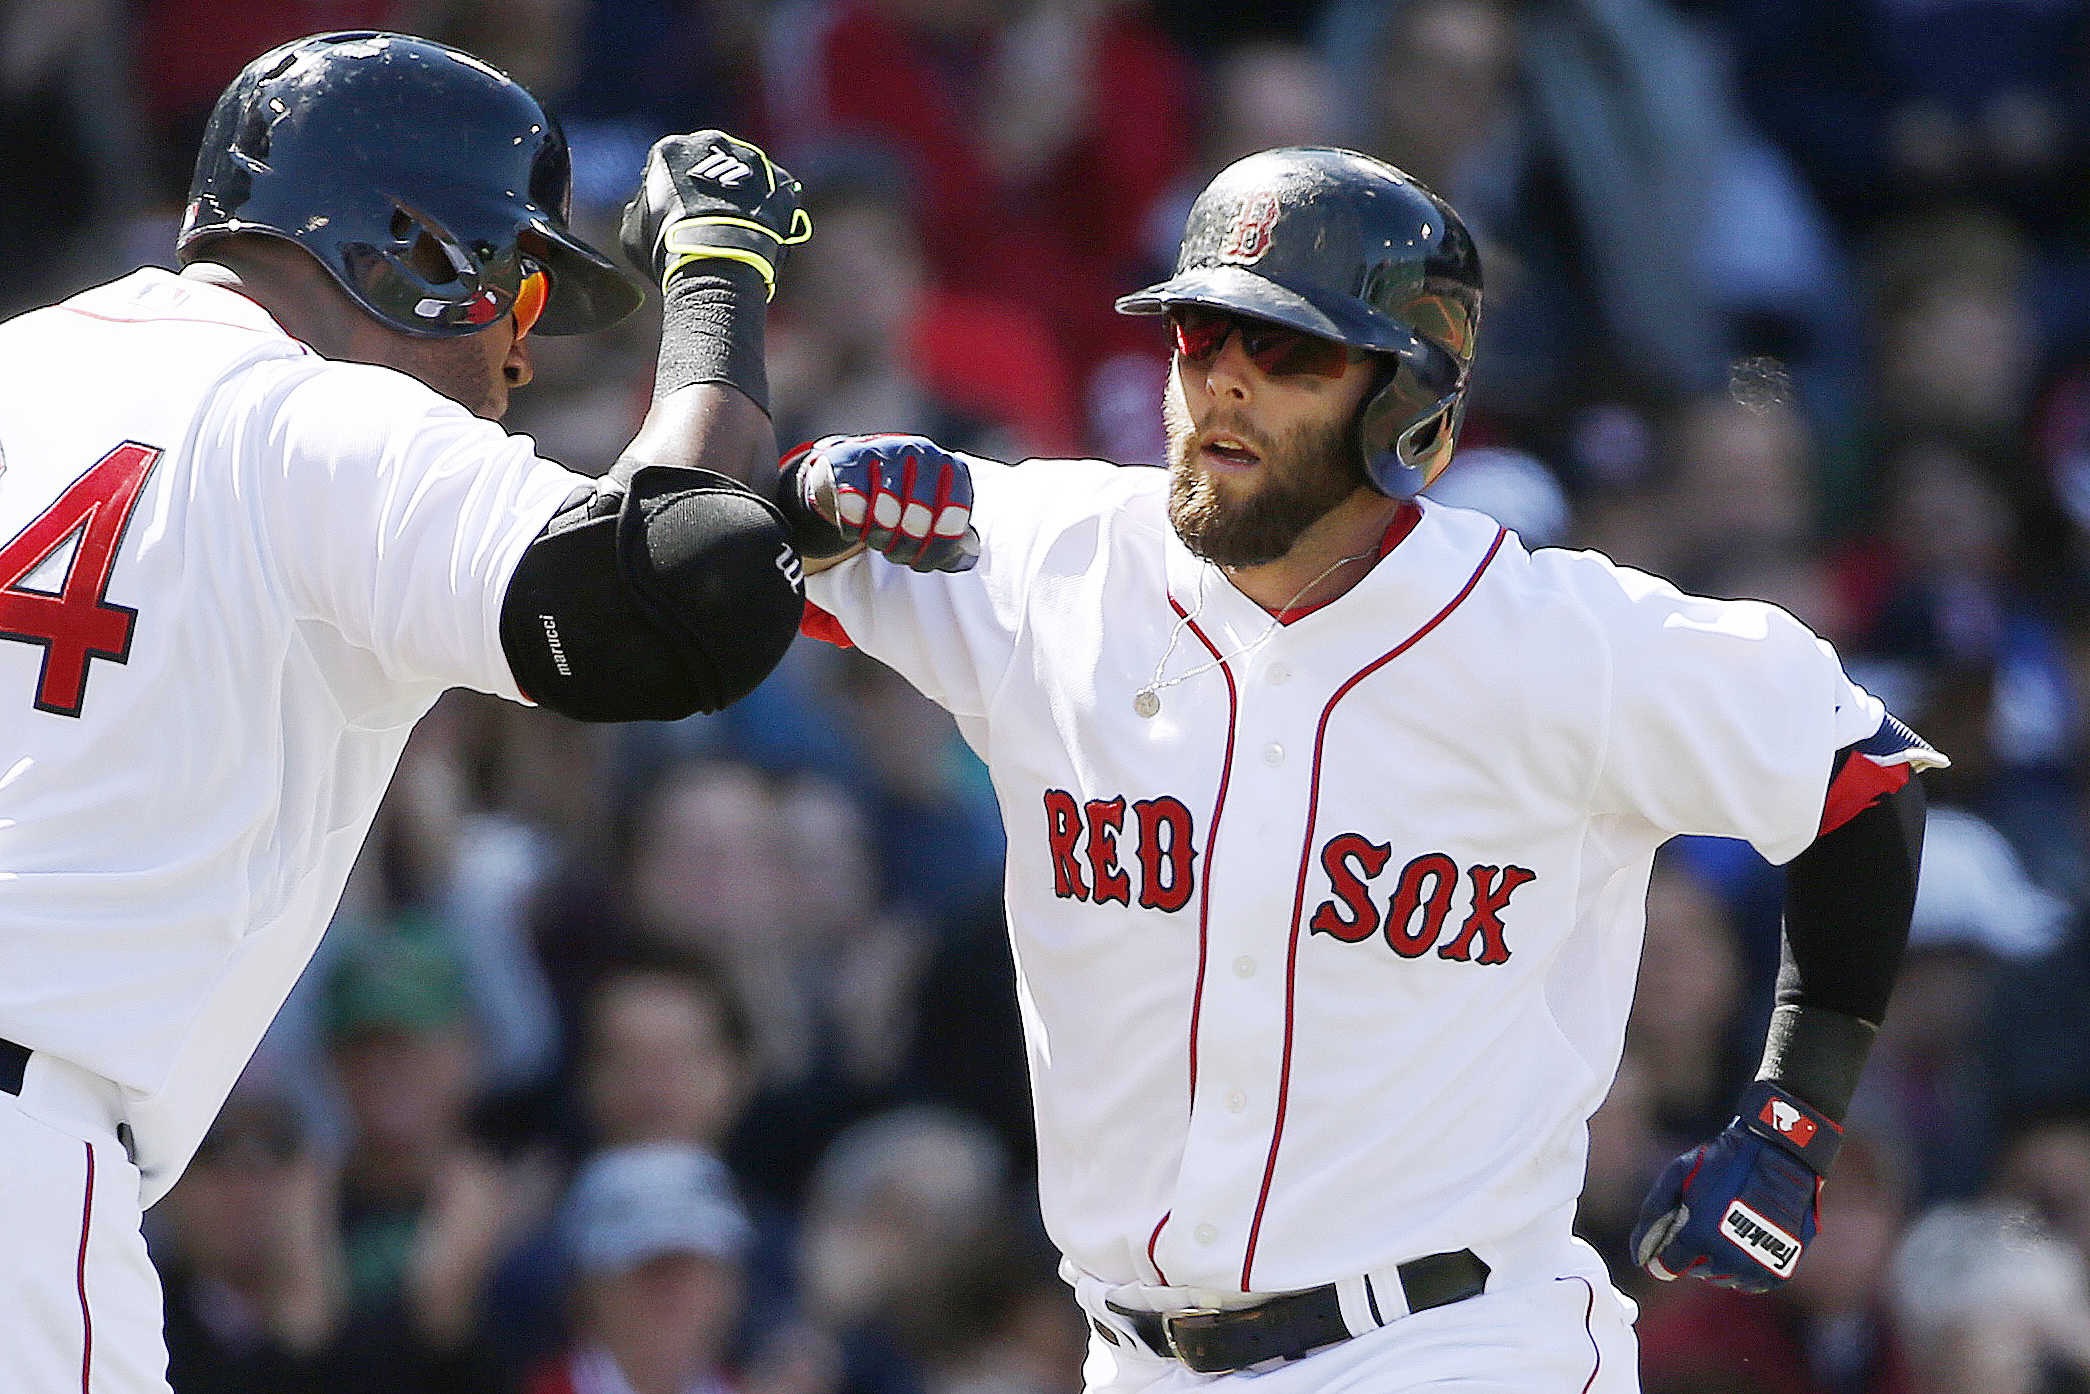 Red Sox legend Dustin Pedroia retires after 14 MLB seasons, three